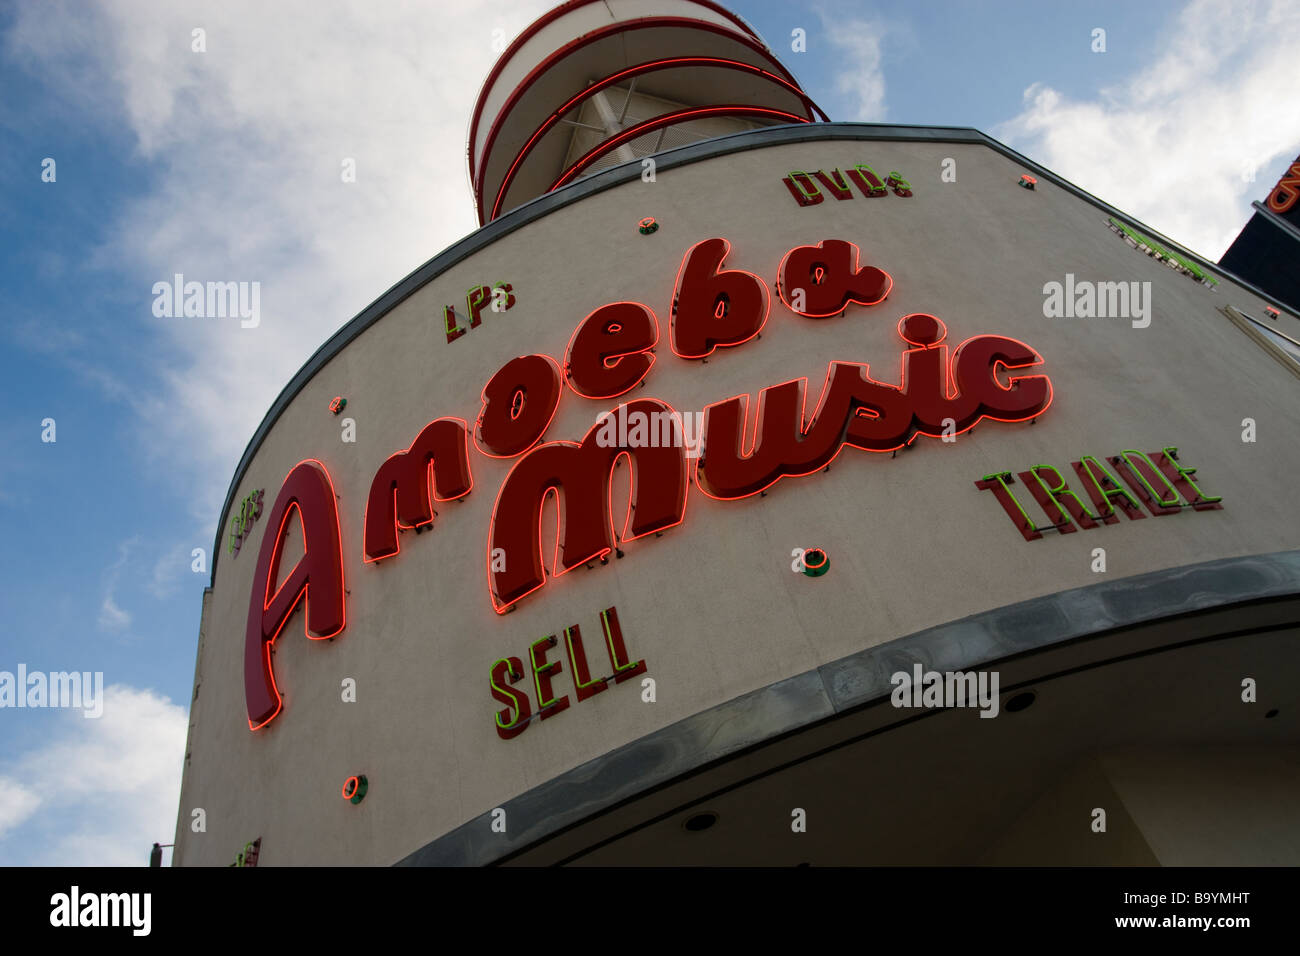 The Ameoba Music record store on Sunset Boulevard in Los Angeles California Stock Photo